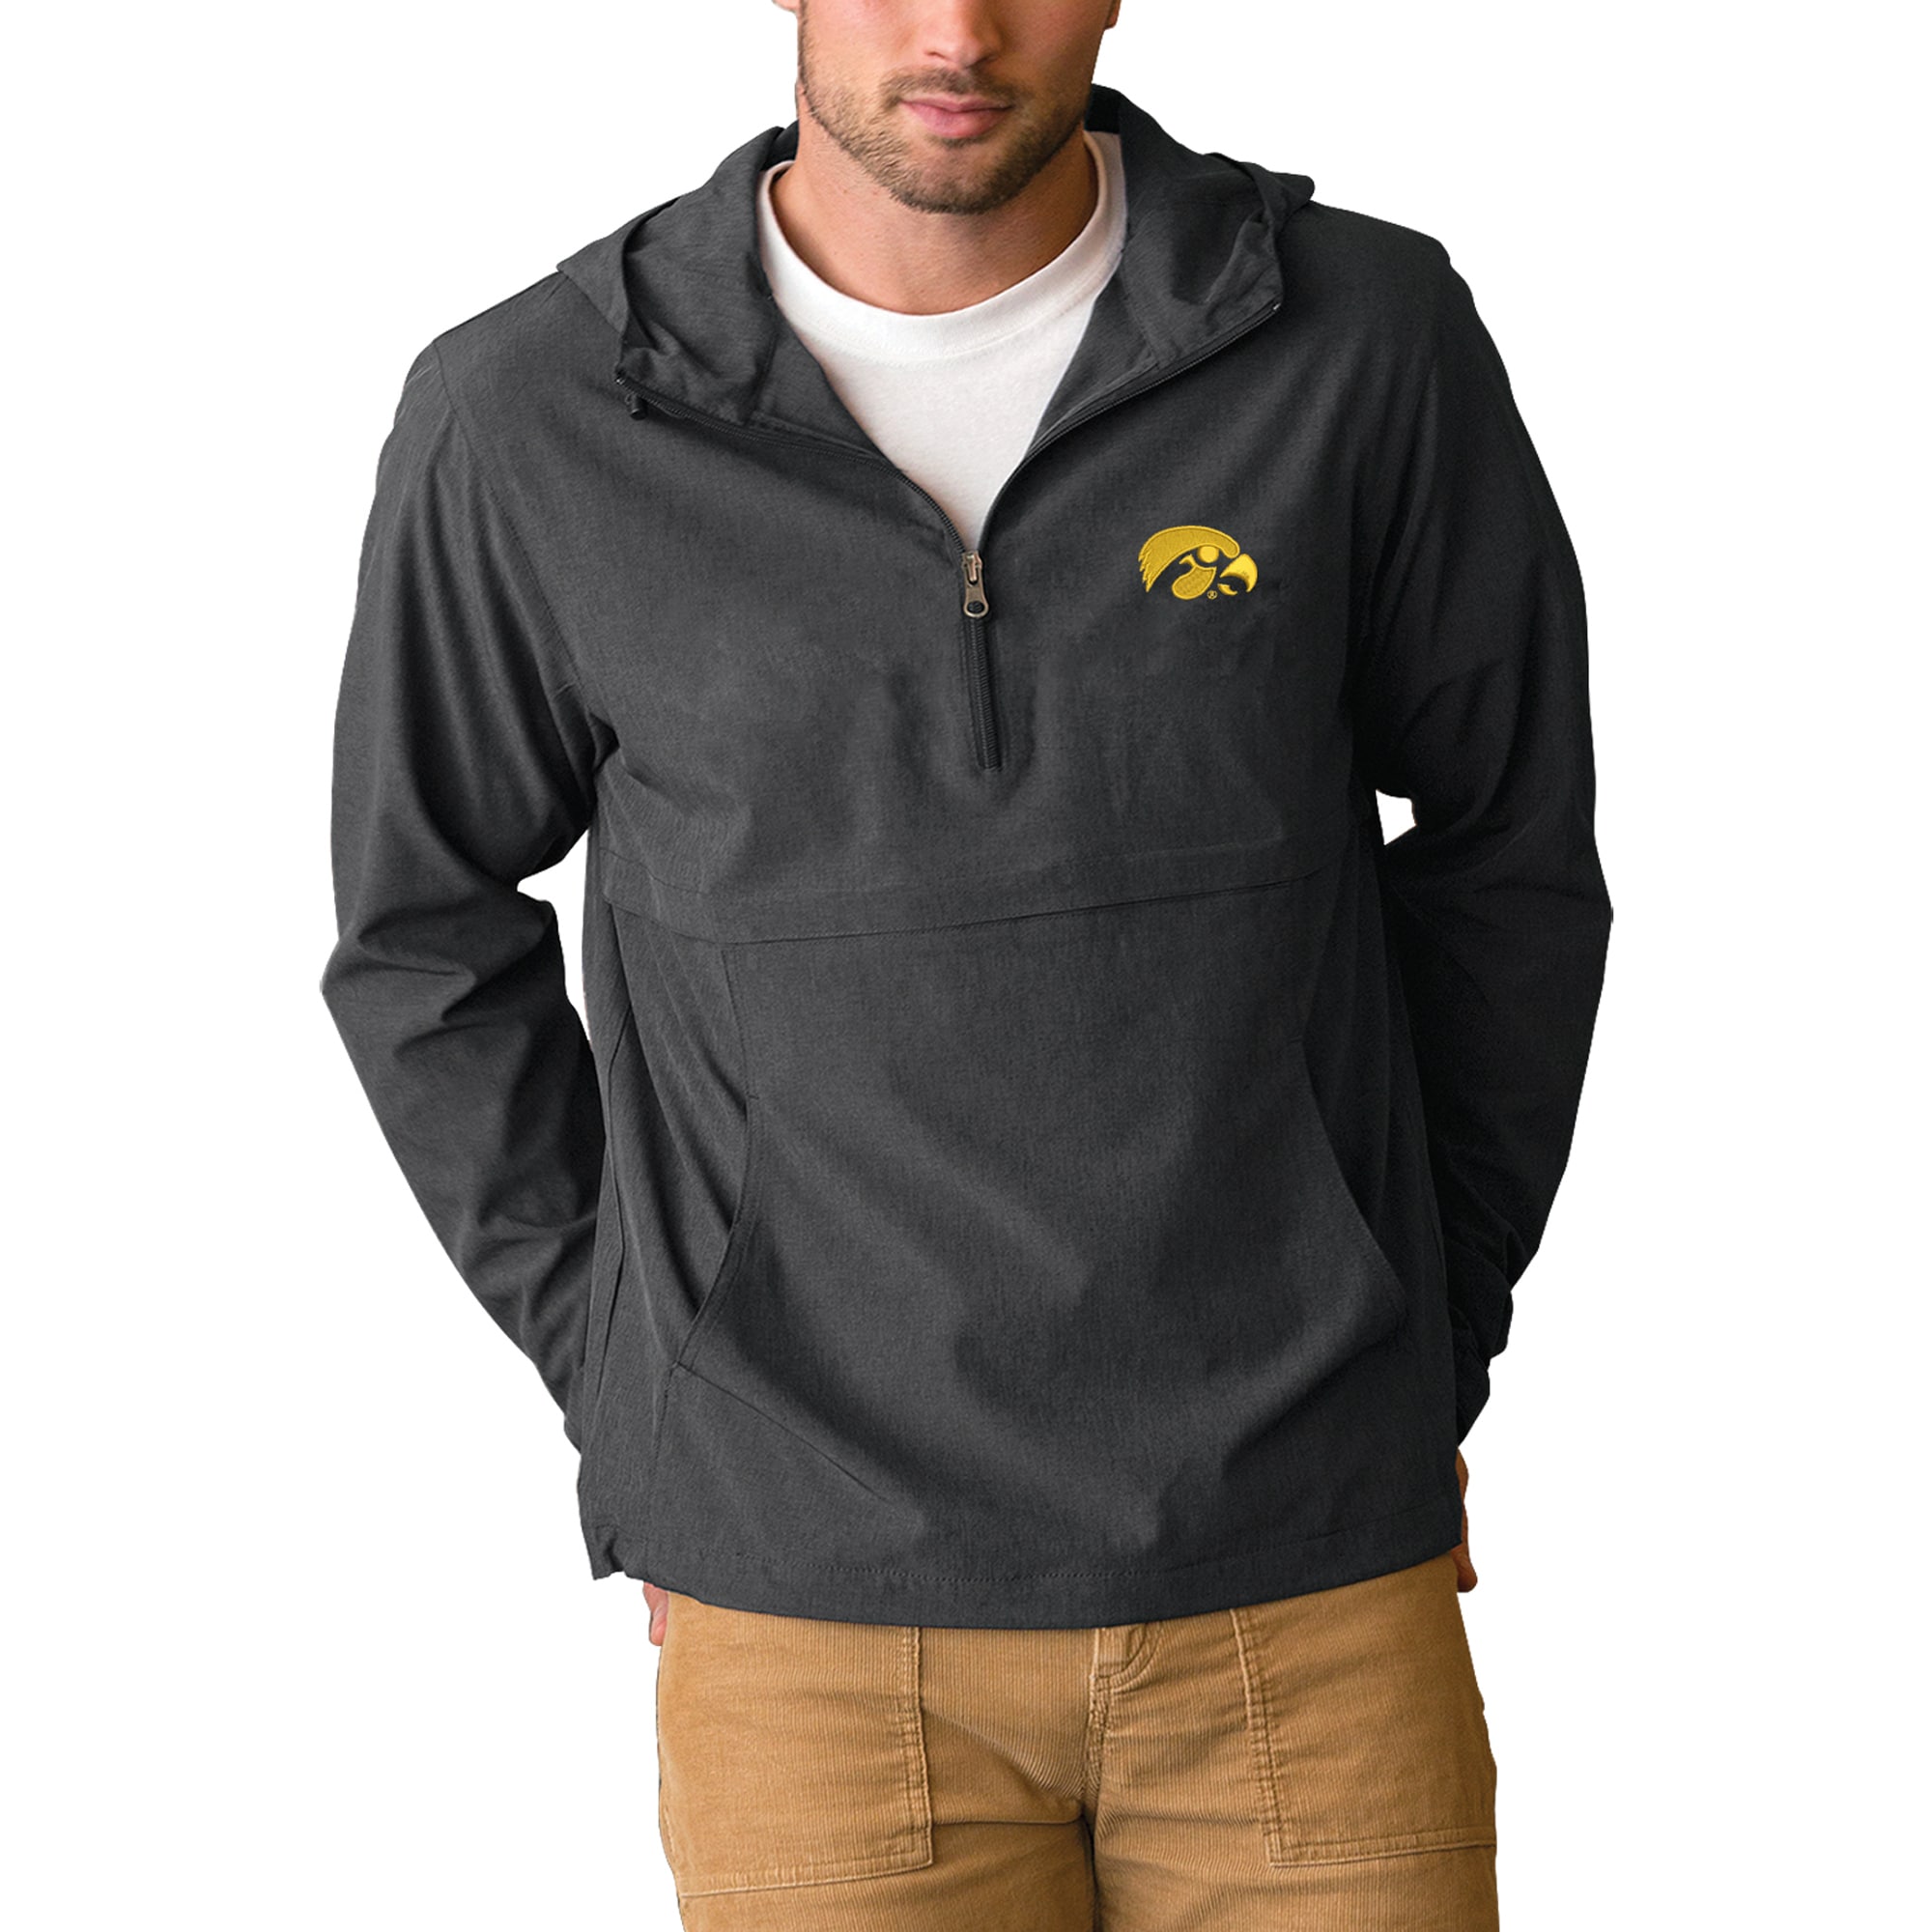 Men's Charcoal Iowa Hawkeyes Stretch Anorak Quarter-Zip Pullover Jacket - image 1 of 1